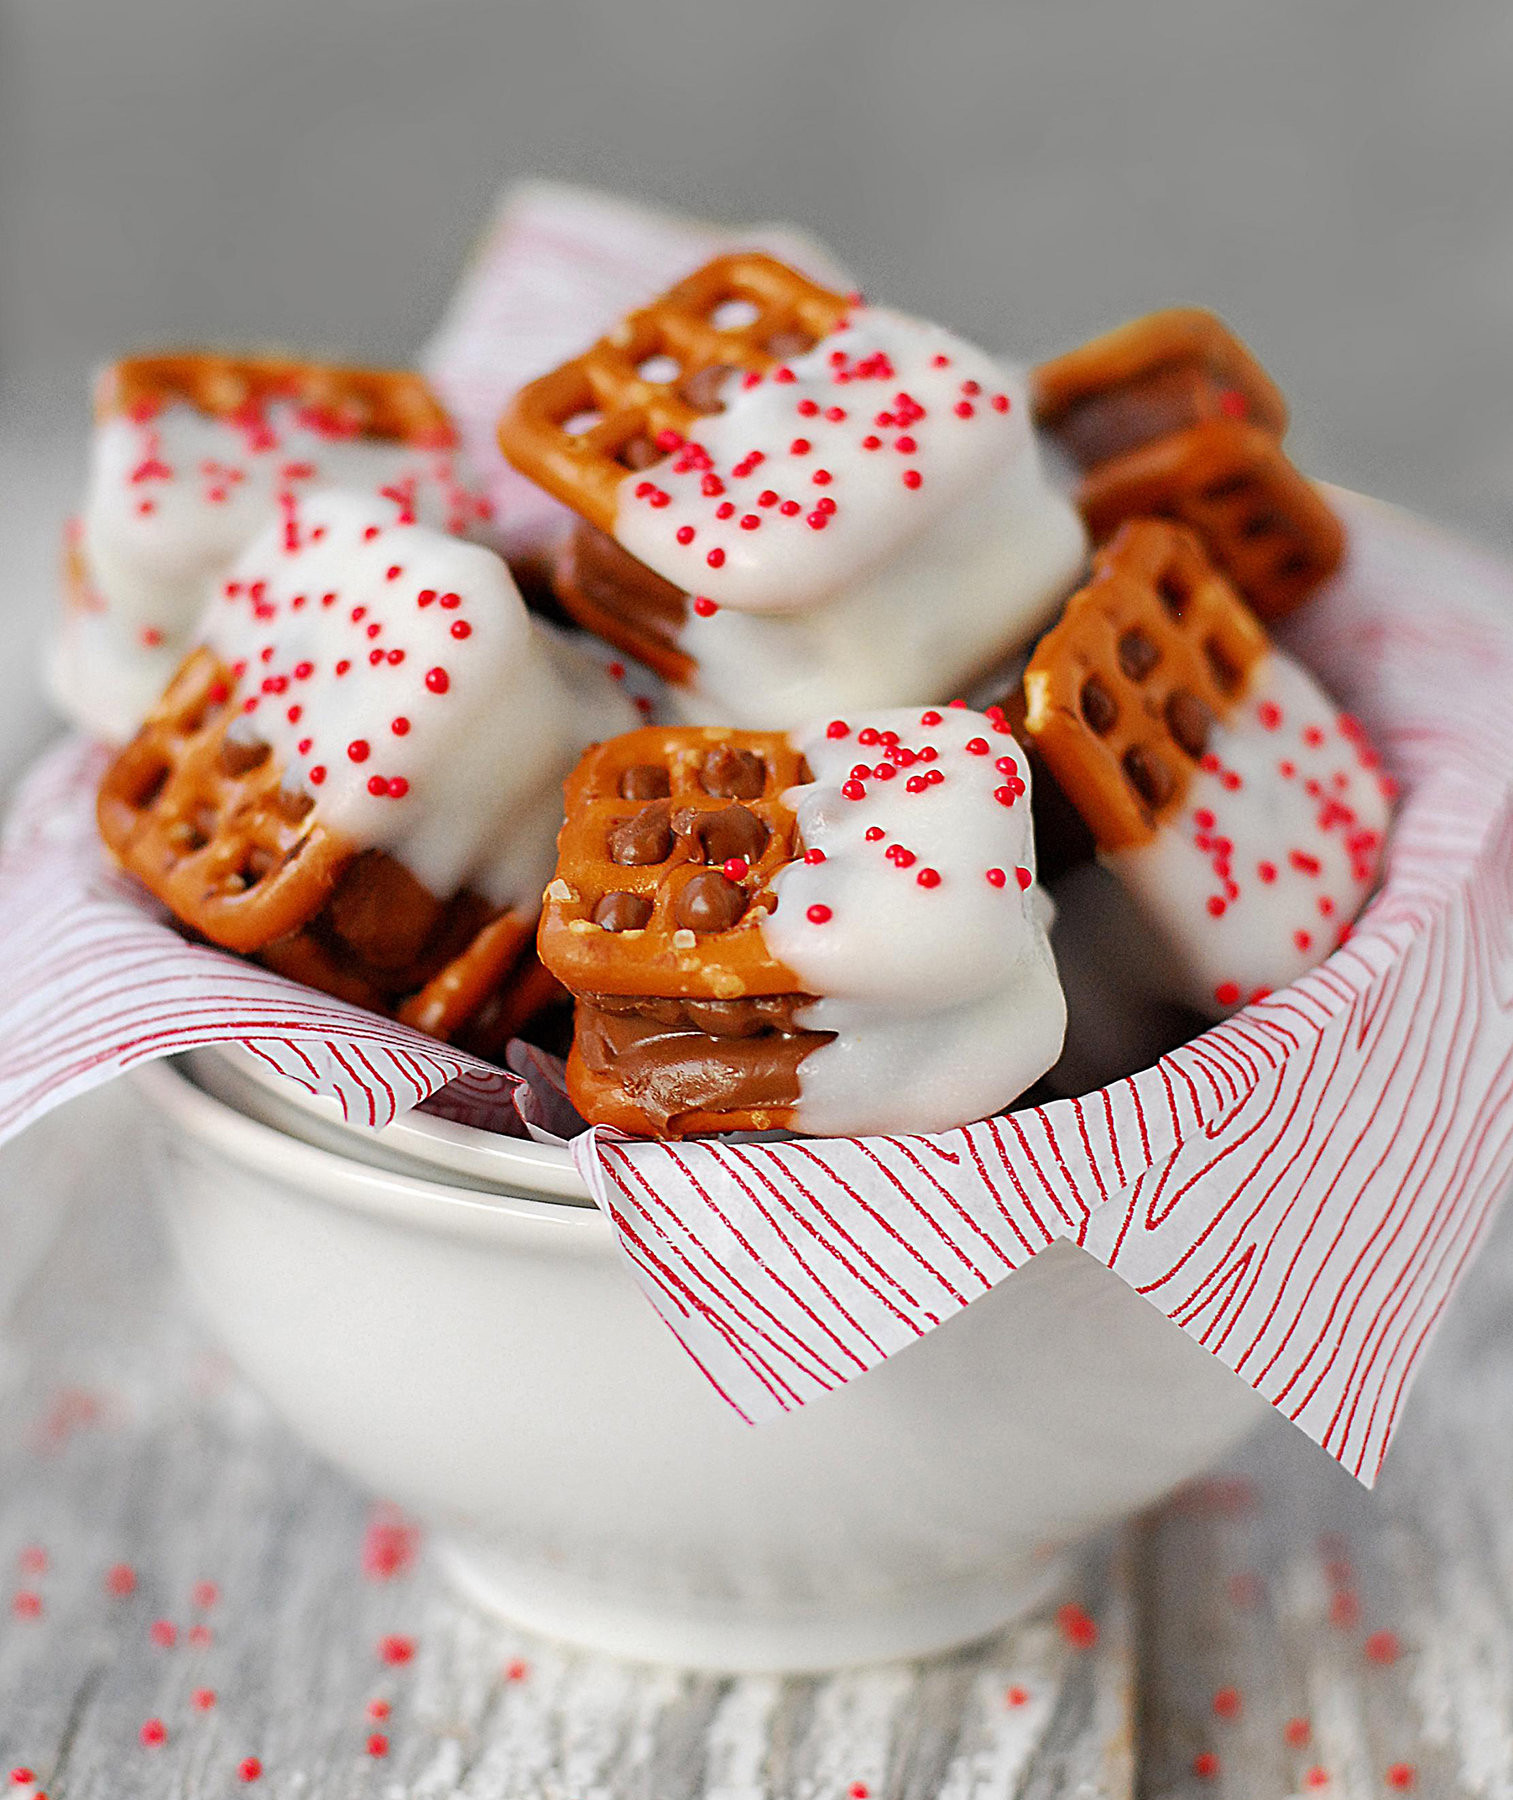 Top 21 Mini Christmas Desserts - Most Popular Ideas of All Time